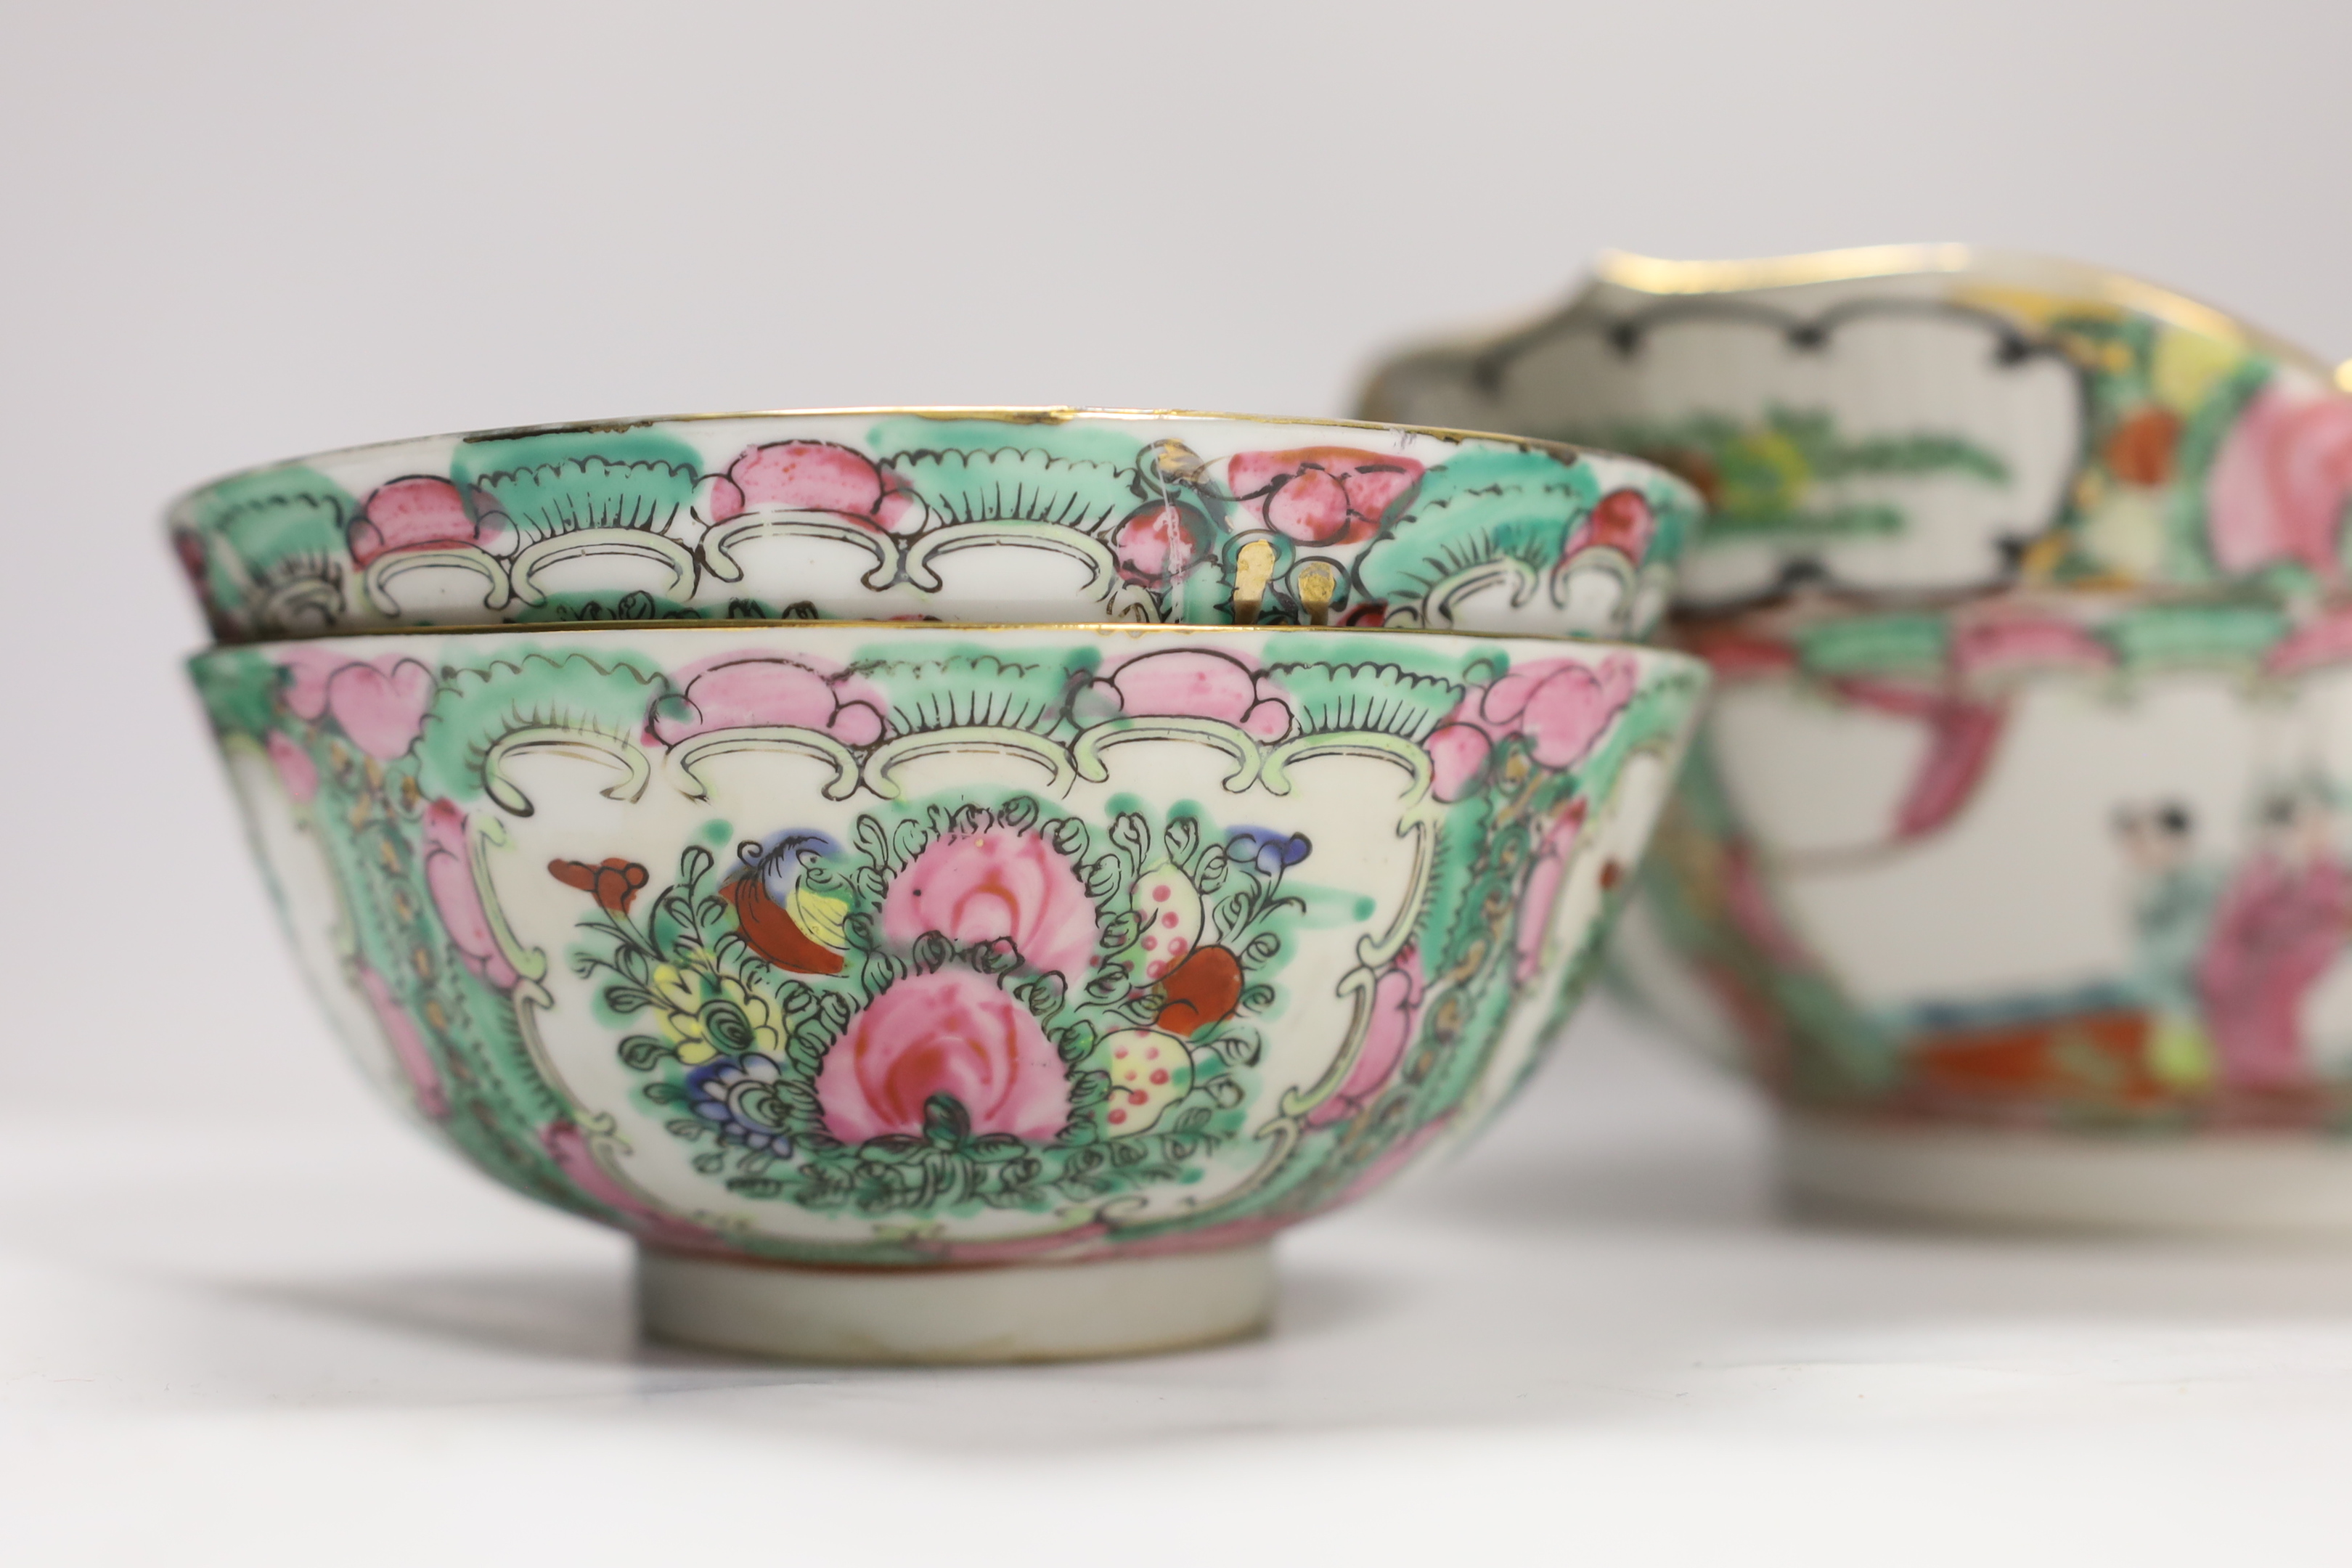 A Chinese famille rose large serving bowl and four smaller bowls, larger bowl 25cm diameter